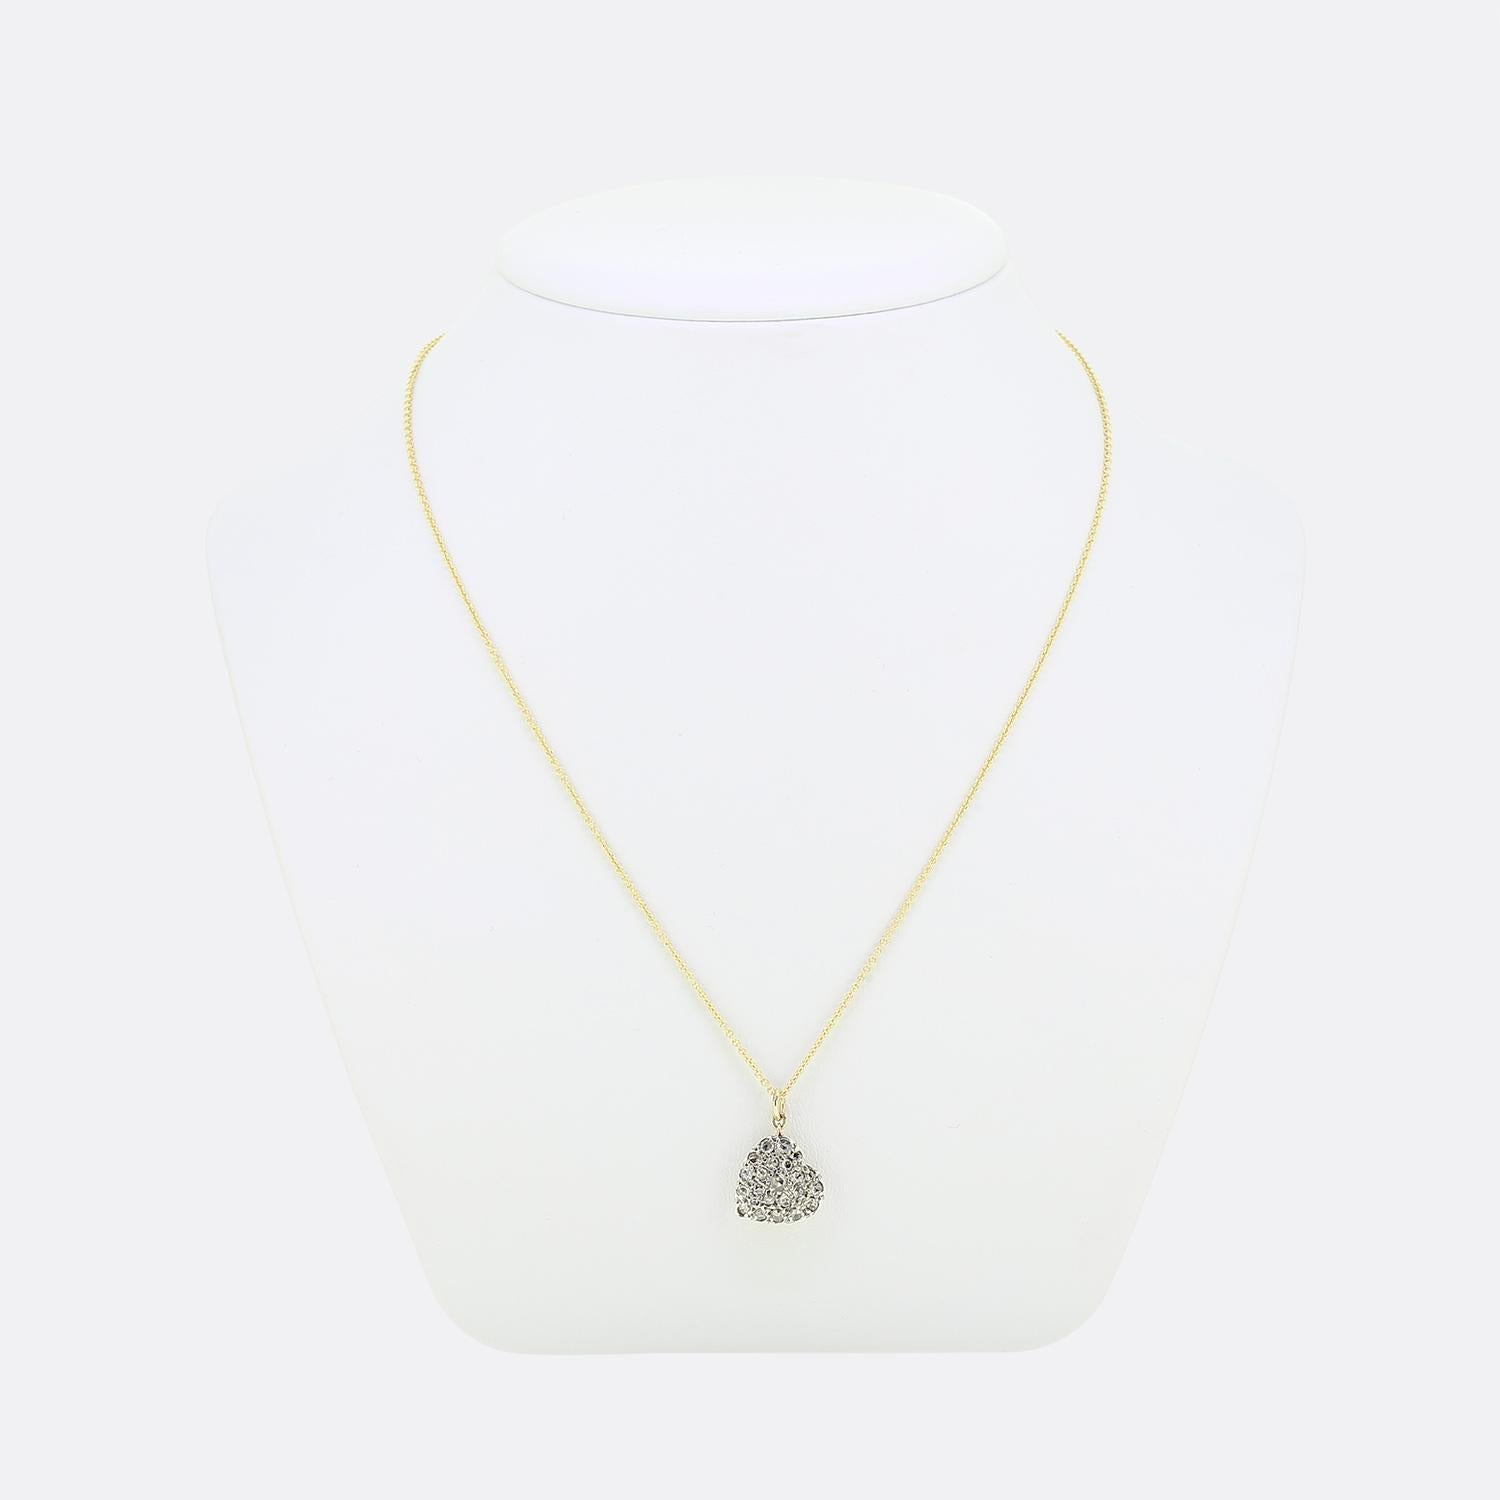 Here we have a gorgeous diamond set pendant necklace. This pendant has been crafted from 18ct yellow gold into the shape a love heart and platinum pave set with a multitude of rose cut diamonds of differing sizes which results in a radiant ensemble.